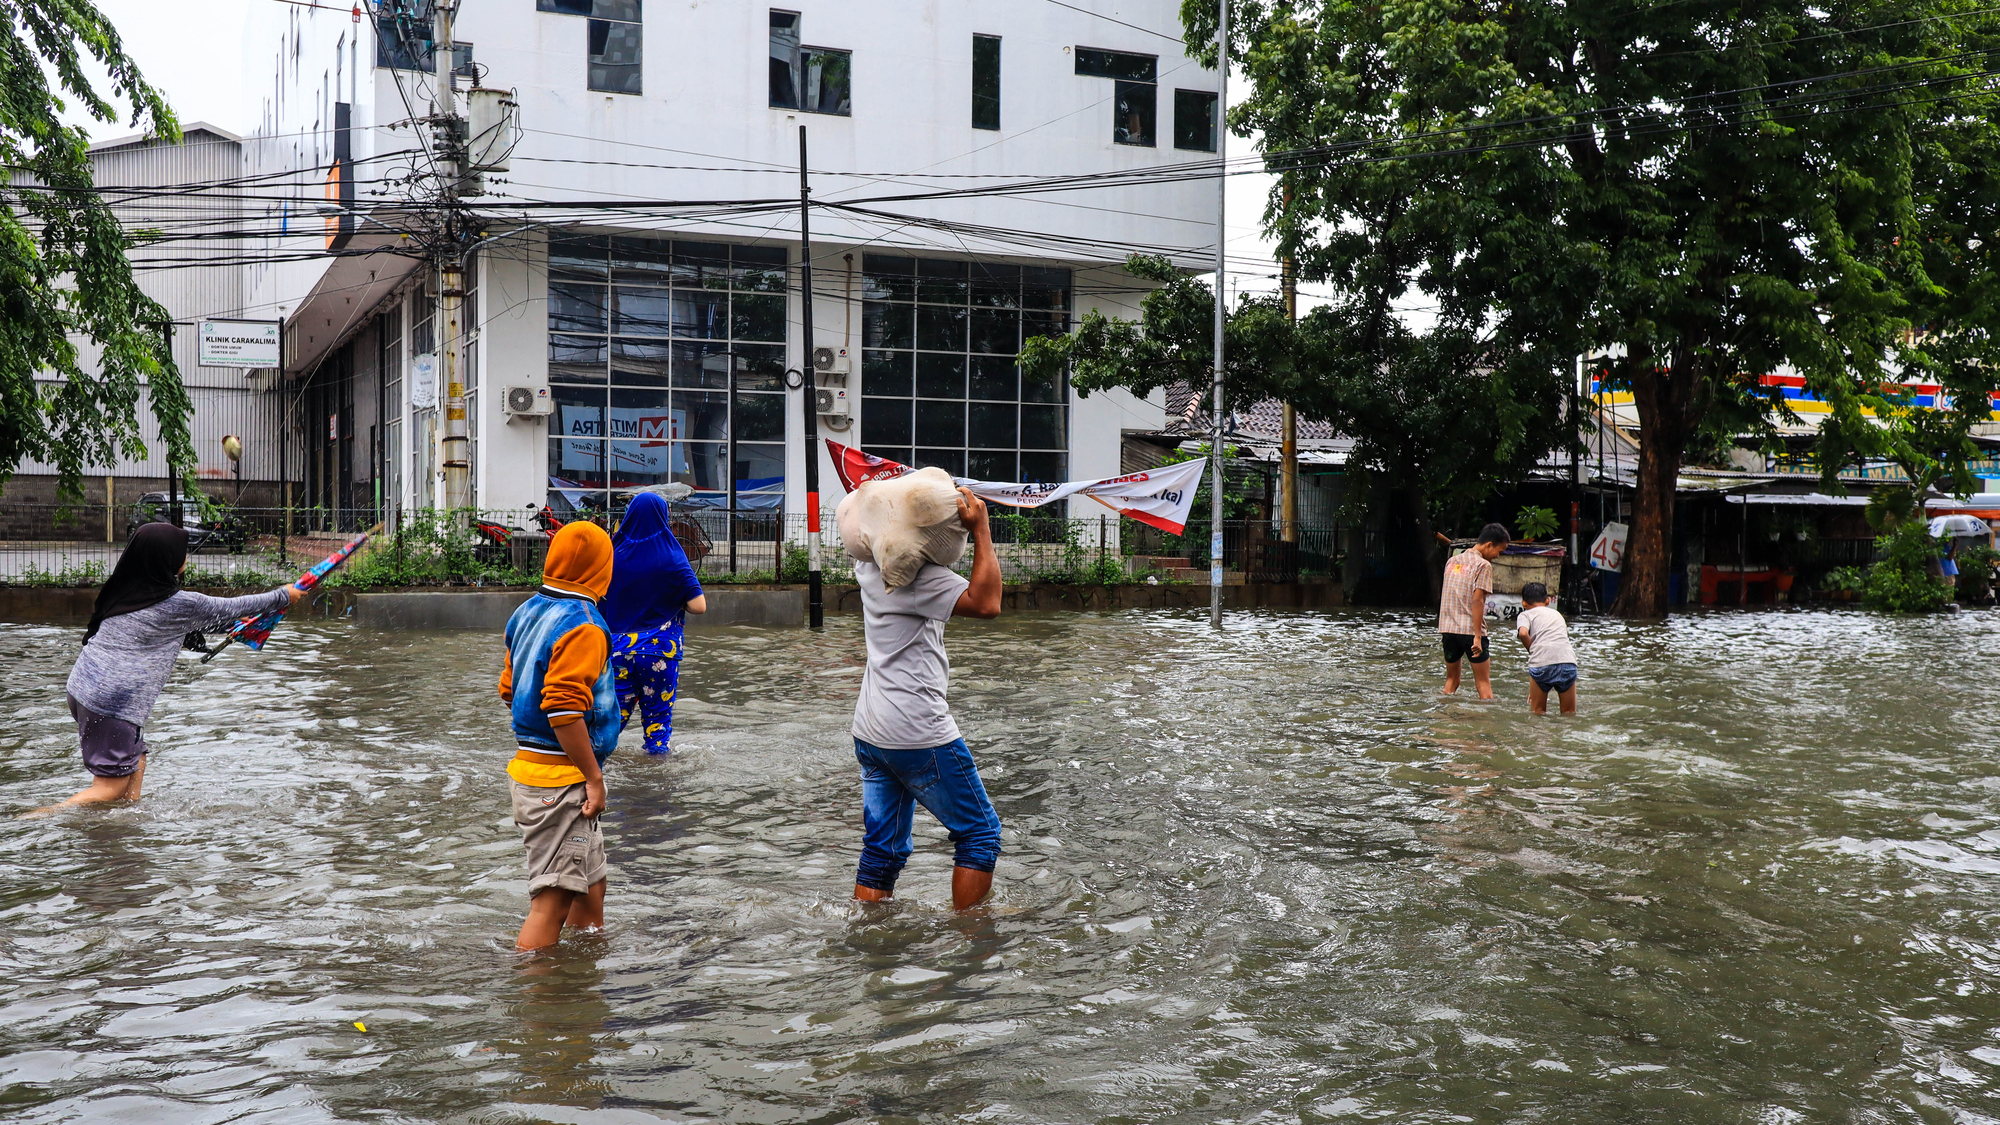 Several people are carrying sacks filled with food and clothing to prepare for evacuation after their house was flooded in Indonesia